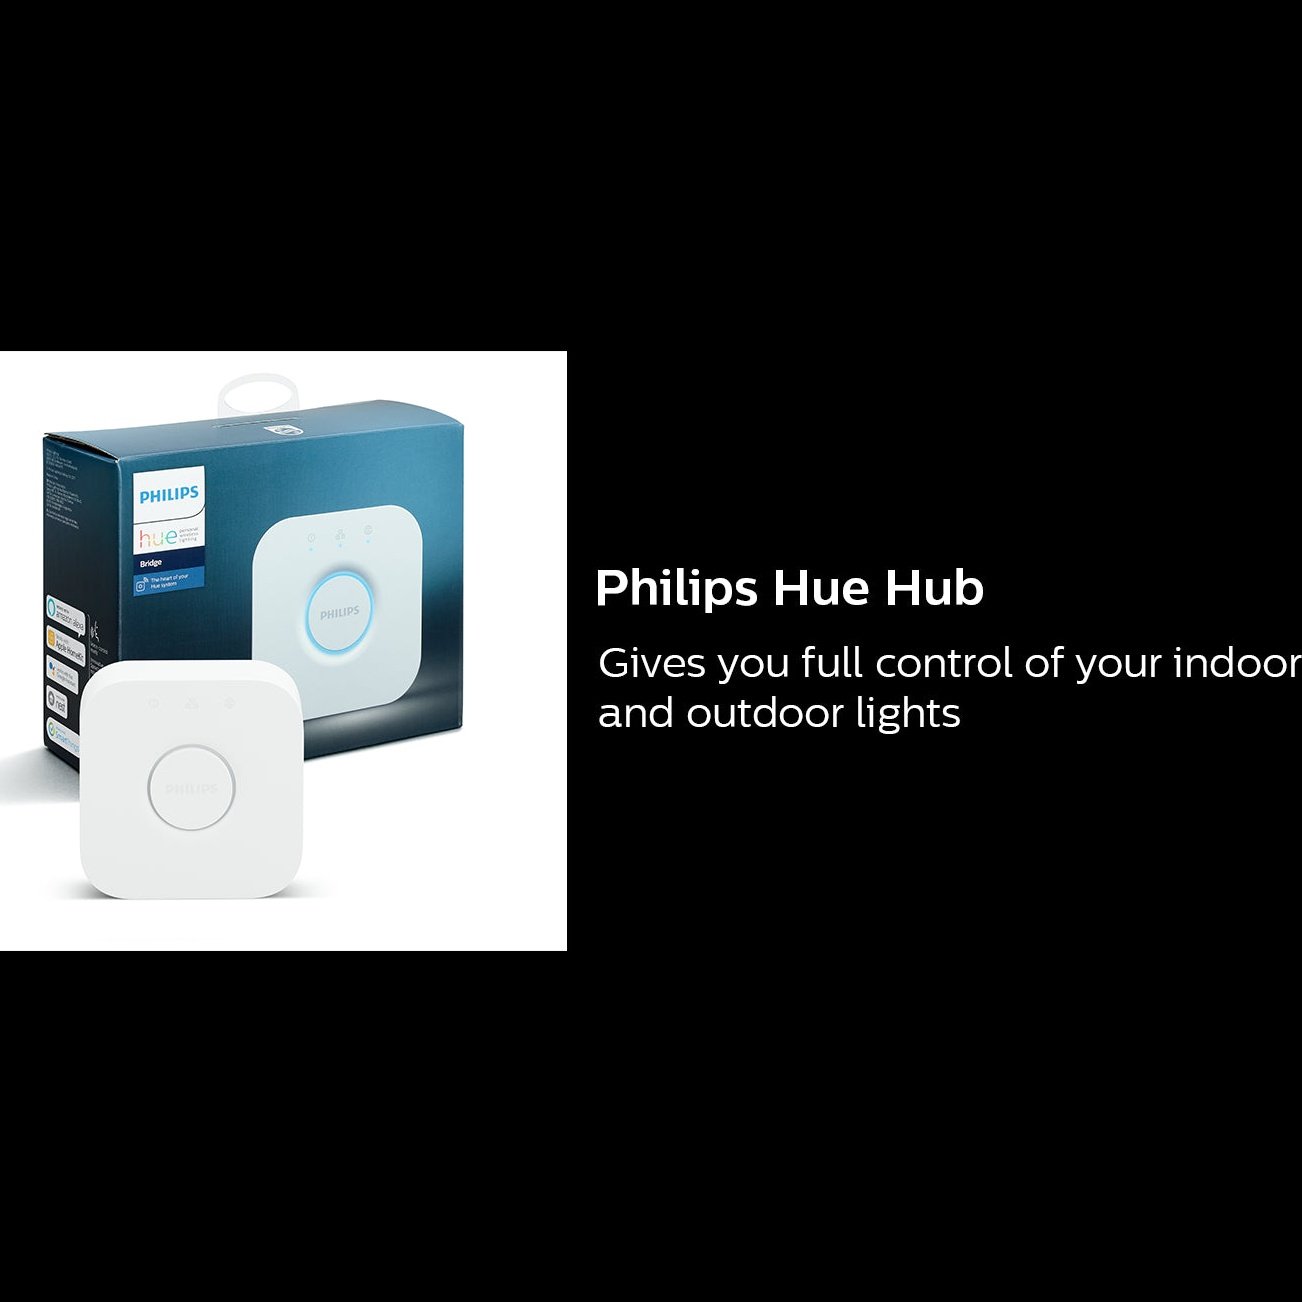 Philips Hue Bridge - Unlock the Full Potential of Hue - Multi-Room and Out-of-Home Control - Create Automations and Zones - Secure, Stable Connection Won't Strain Your Wi-Fi - Works with Voice, Matter